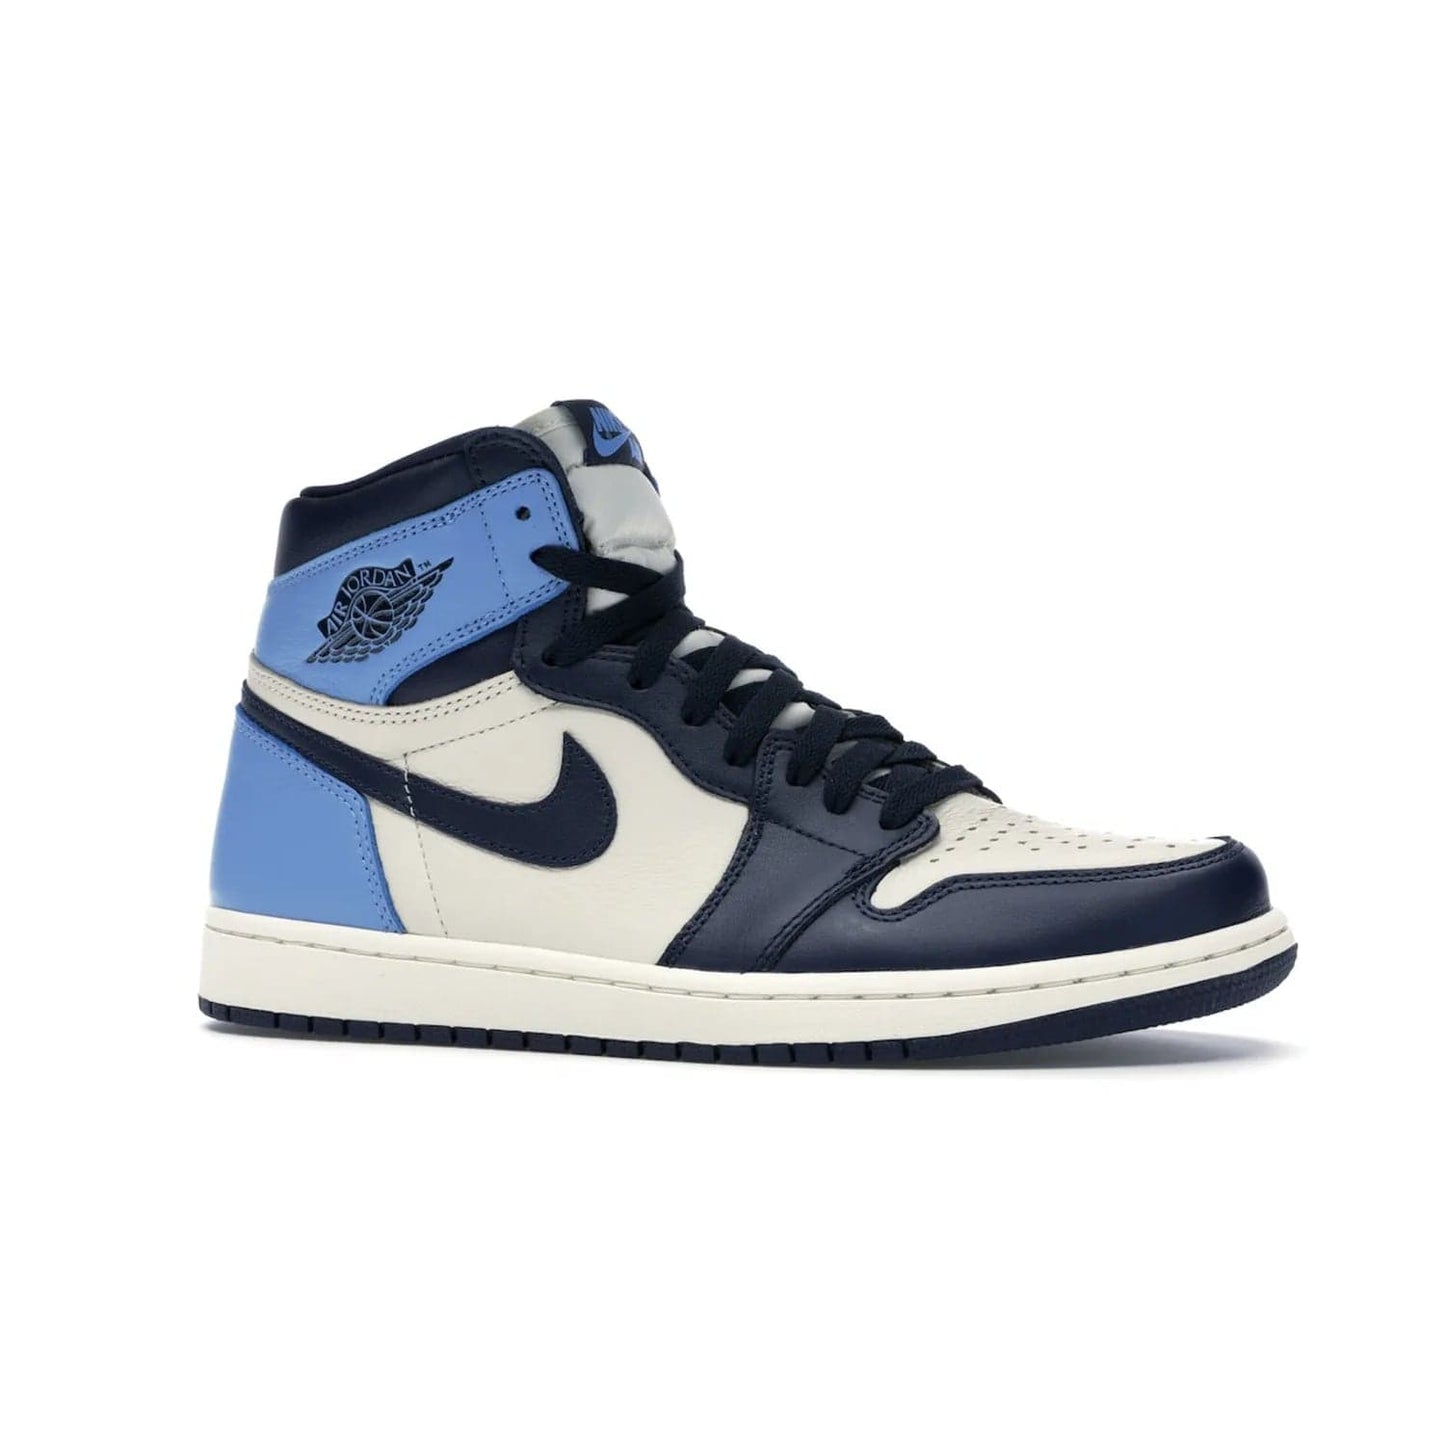 Jordan 1 Retro High Obsidian UNC - Image 3 - Only at www.BallersClubKickz.com - Bring a timeless classic to your wardrobe with the Air Jordan 1 Retro High "Obsidian/University Blue”. A full leather upper combines Obsidian and University Blue detailing for a retro Jordan style. Stitched Jumpman logo pays tribute to UNC. Experience classic style with a timeless sneaker.